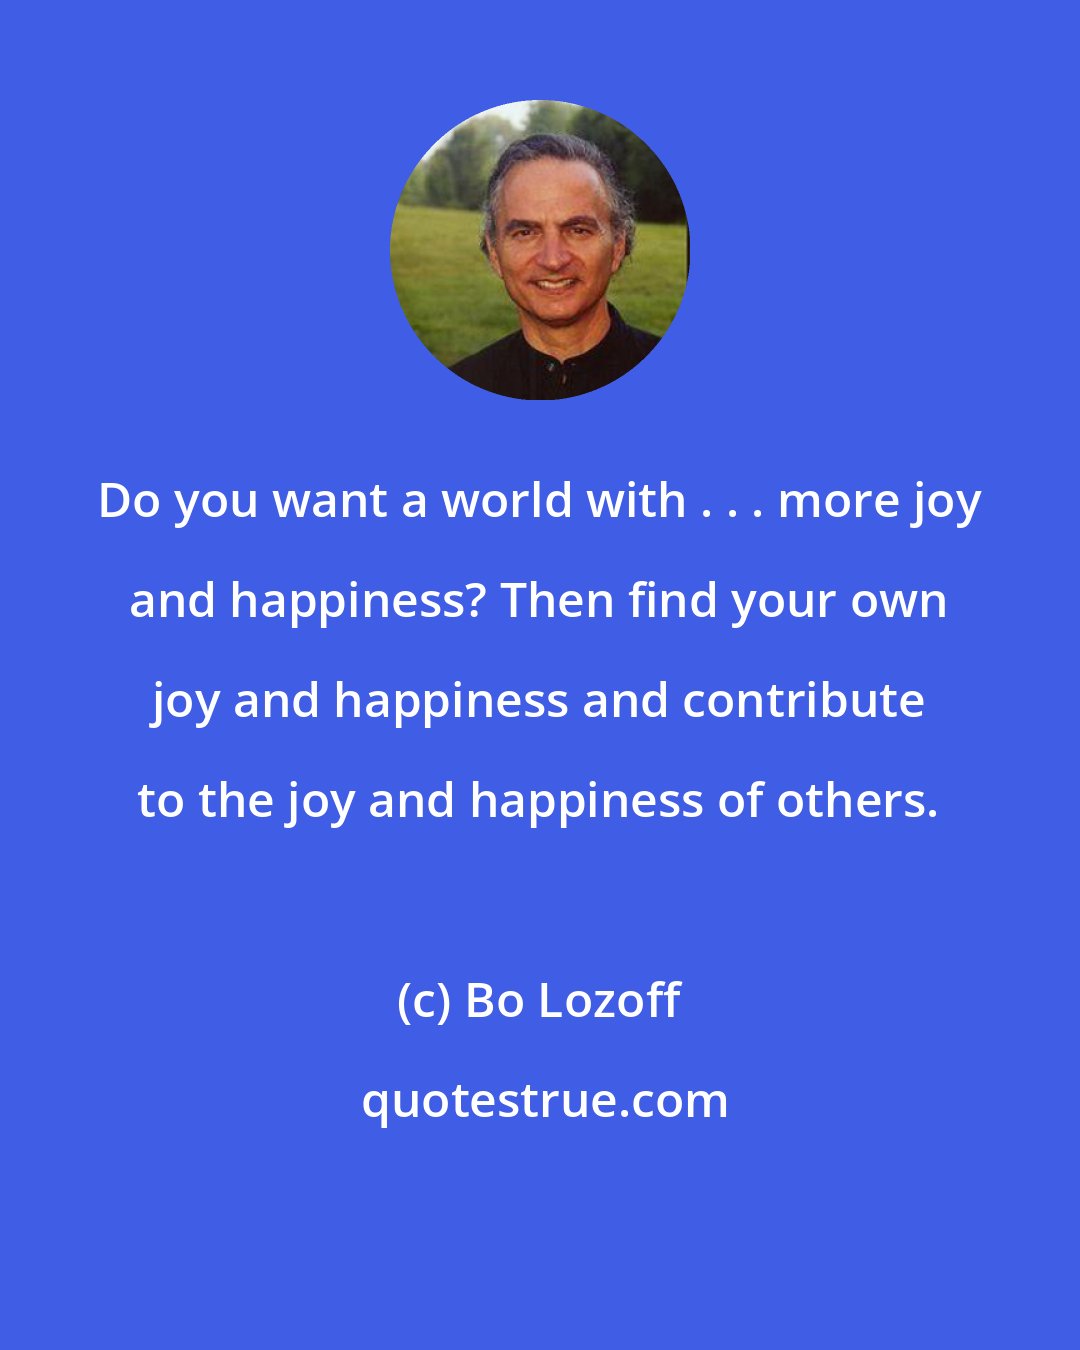 Bo Lozoff: Do you want a world with . . . more joy and happiness? Then find your own joy and happiness and contribute to the joy and happiness of others.